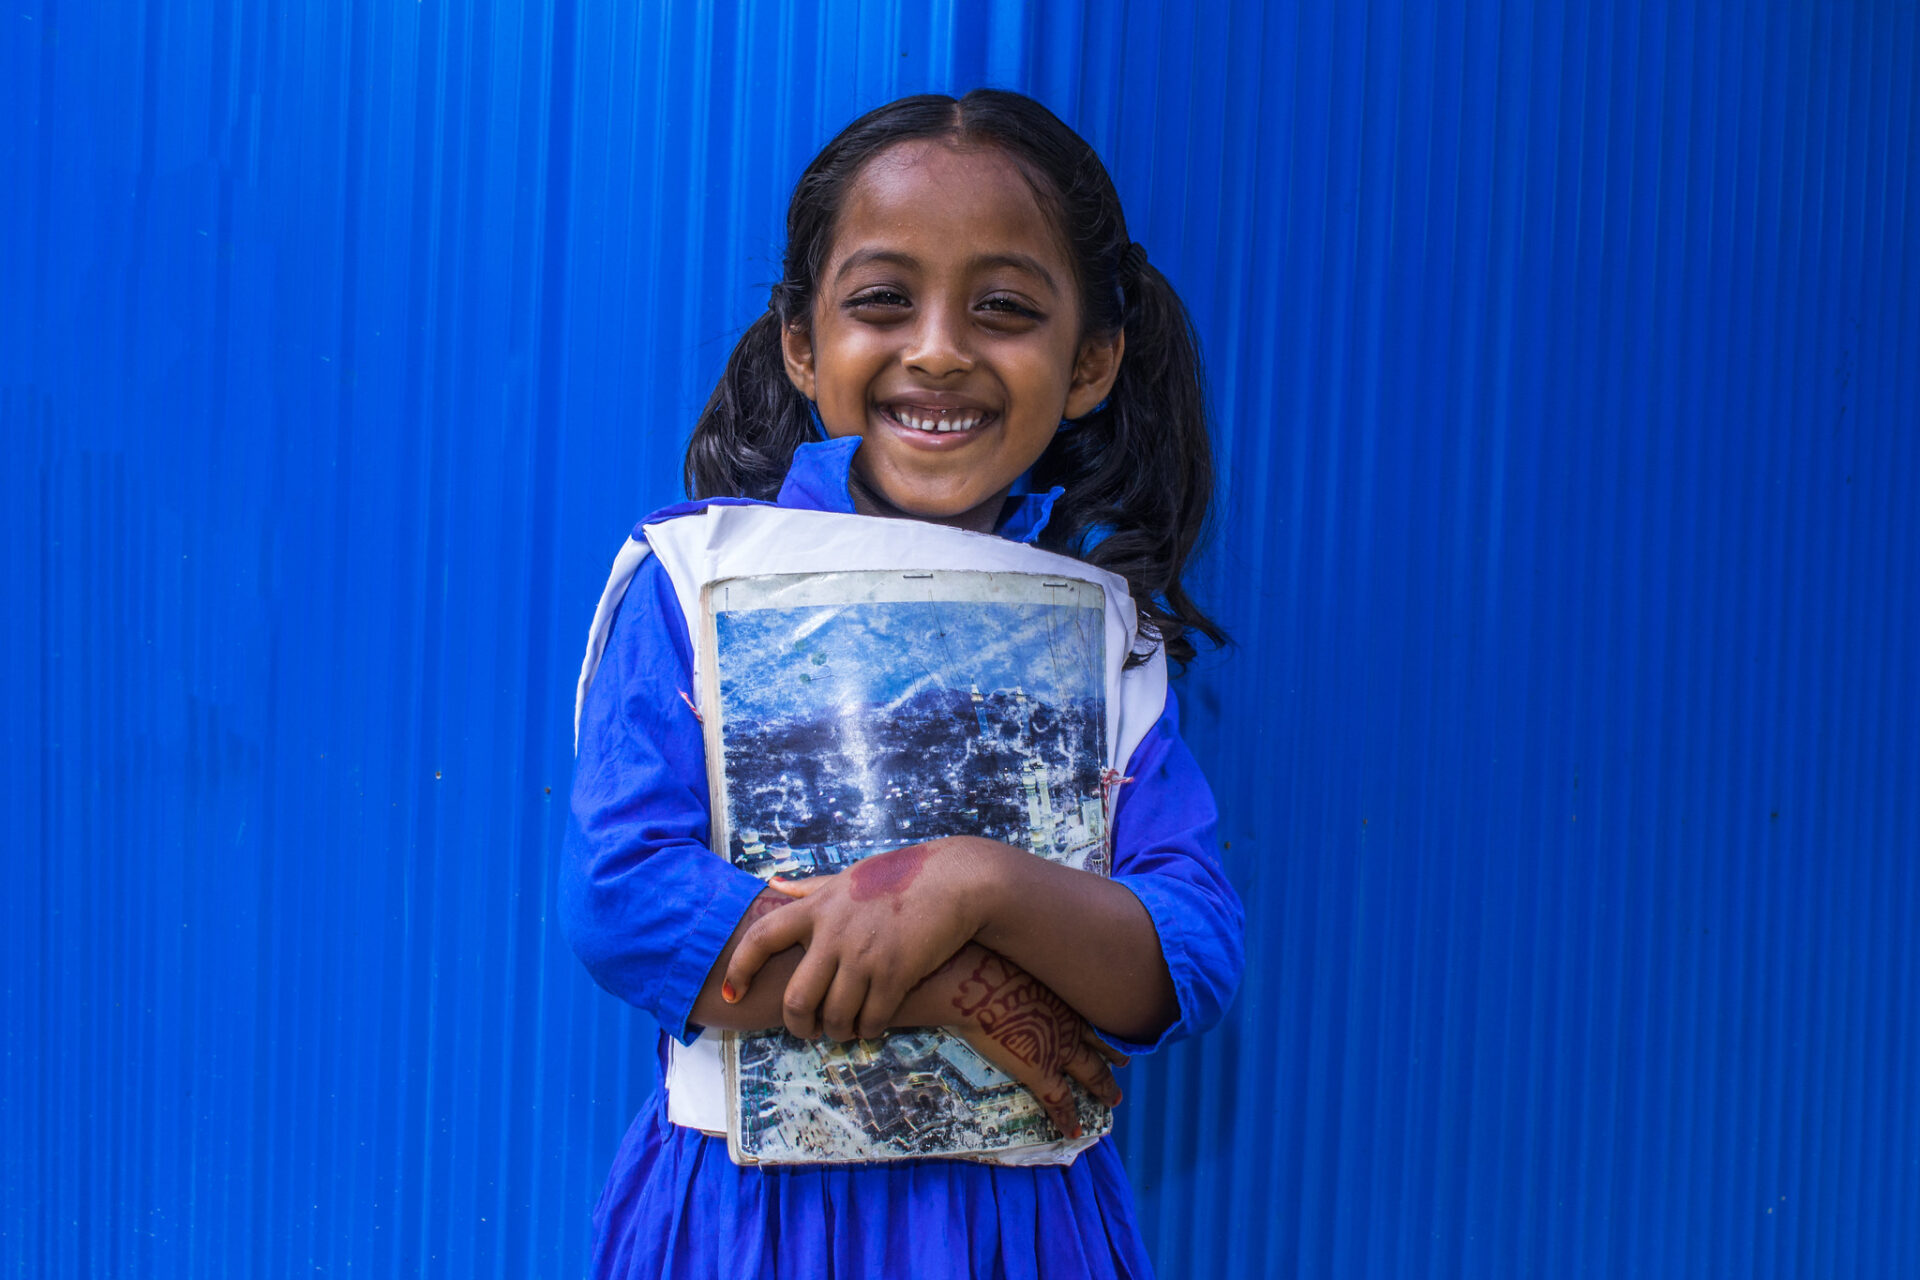 A young girl, with a brilliant smile, stands in front a bright blue background that matches her new school dress.